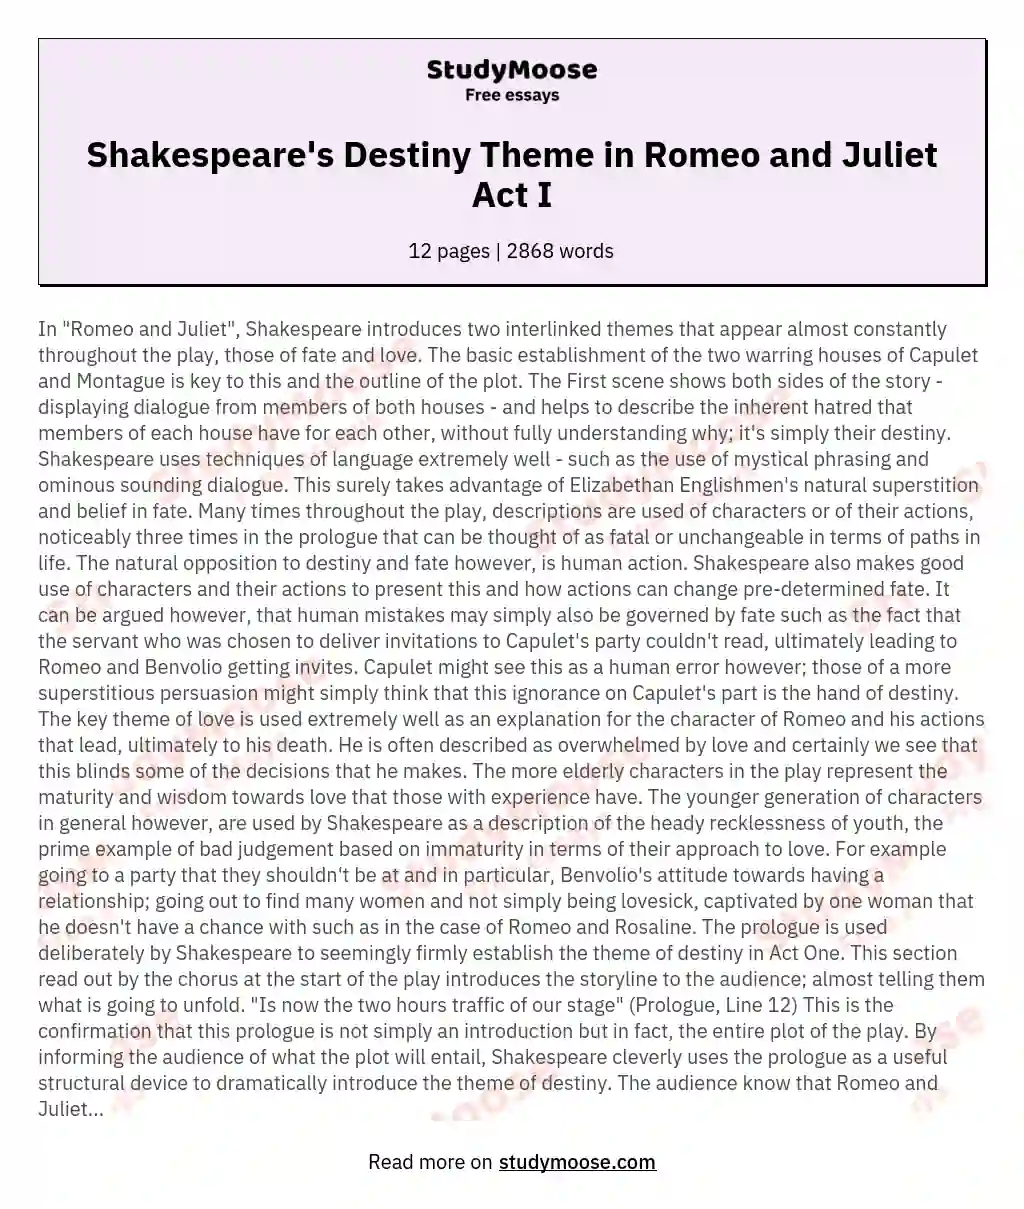 How Does Shakespeare Introduce the Theme Of Destiny In Act 1 Of "Romeo and Juliet"?